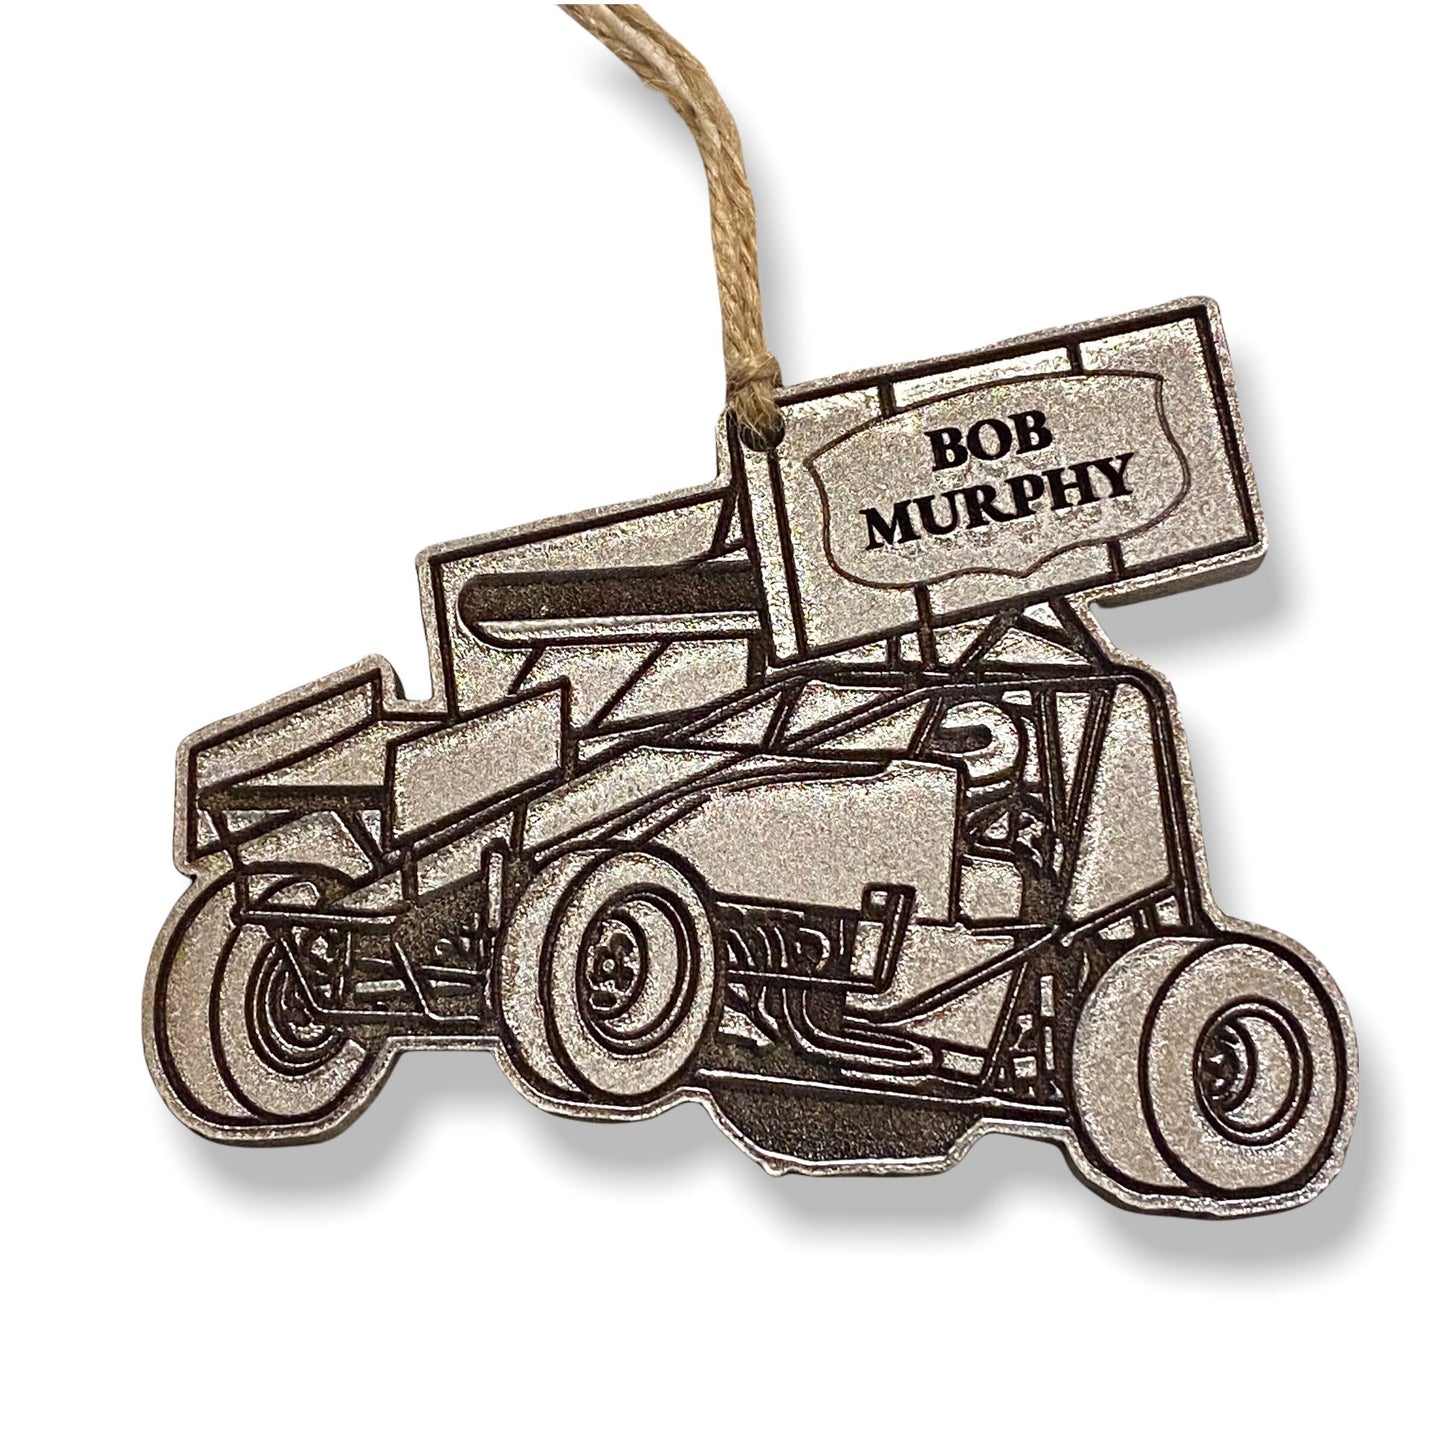 Sprint Car Dirt Track Racing Christmas Ornament Personalized